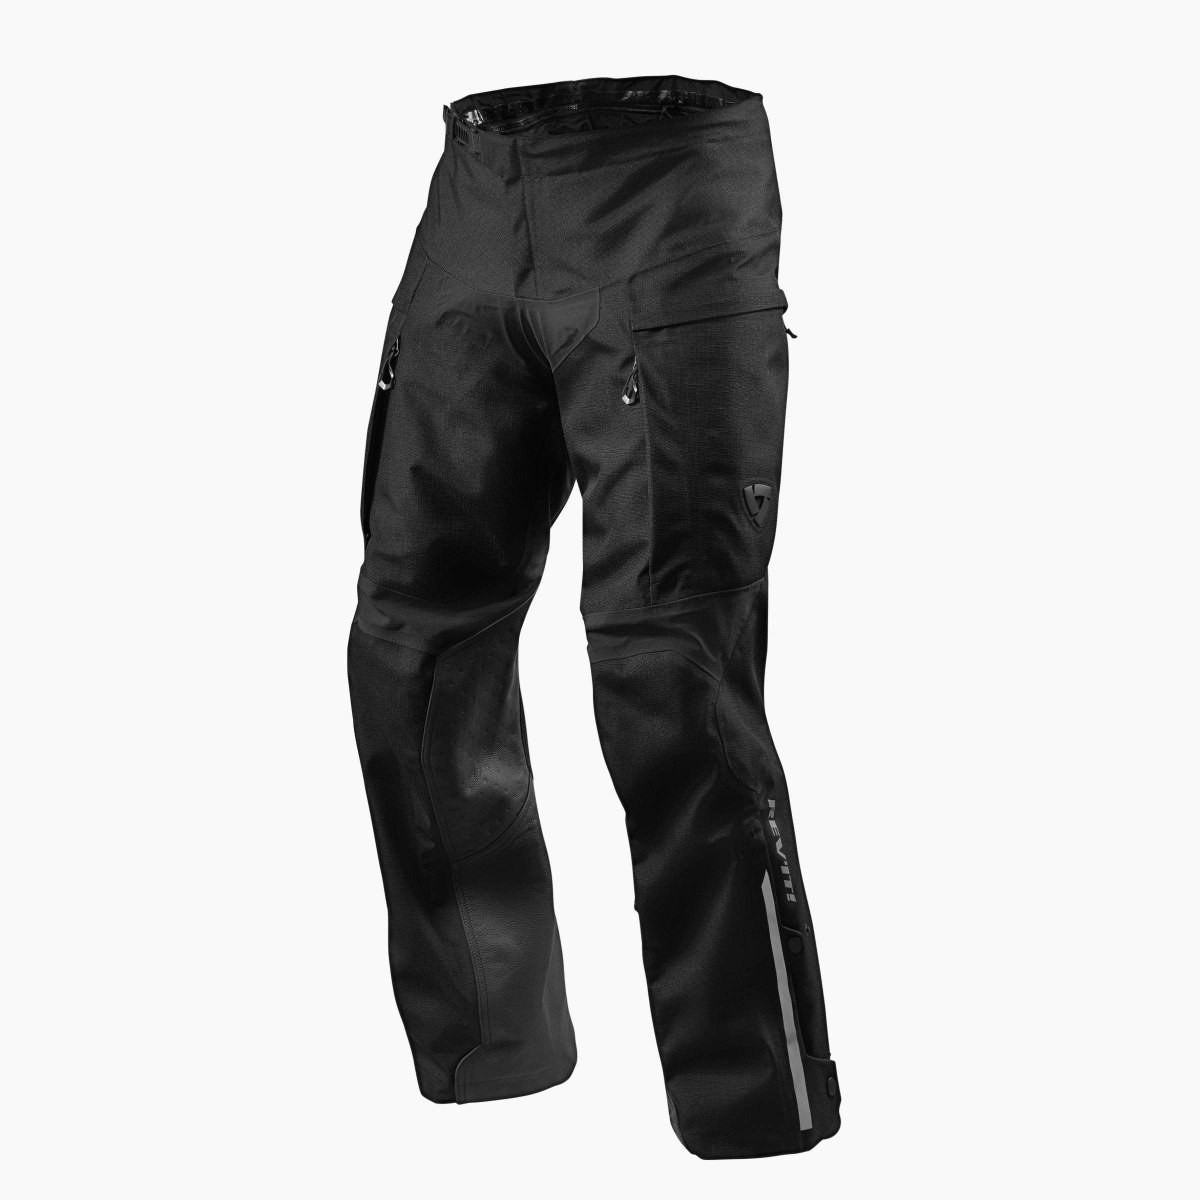 Image of REV'IT! Component H2O Standard Black Motorcycle Pants Size 4XL ID 8700001317702